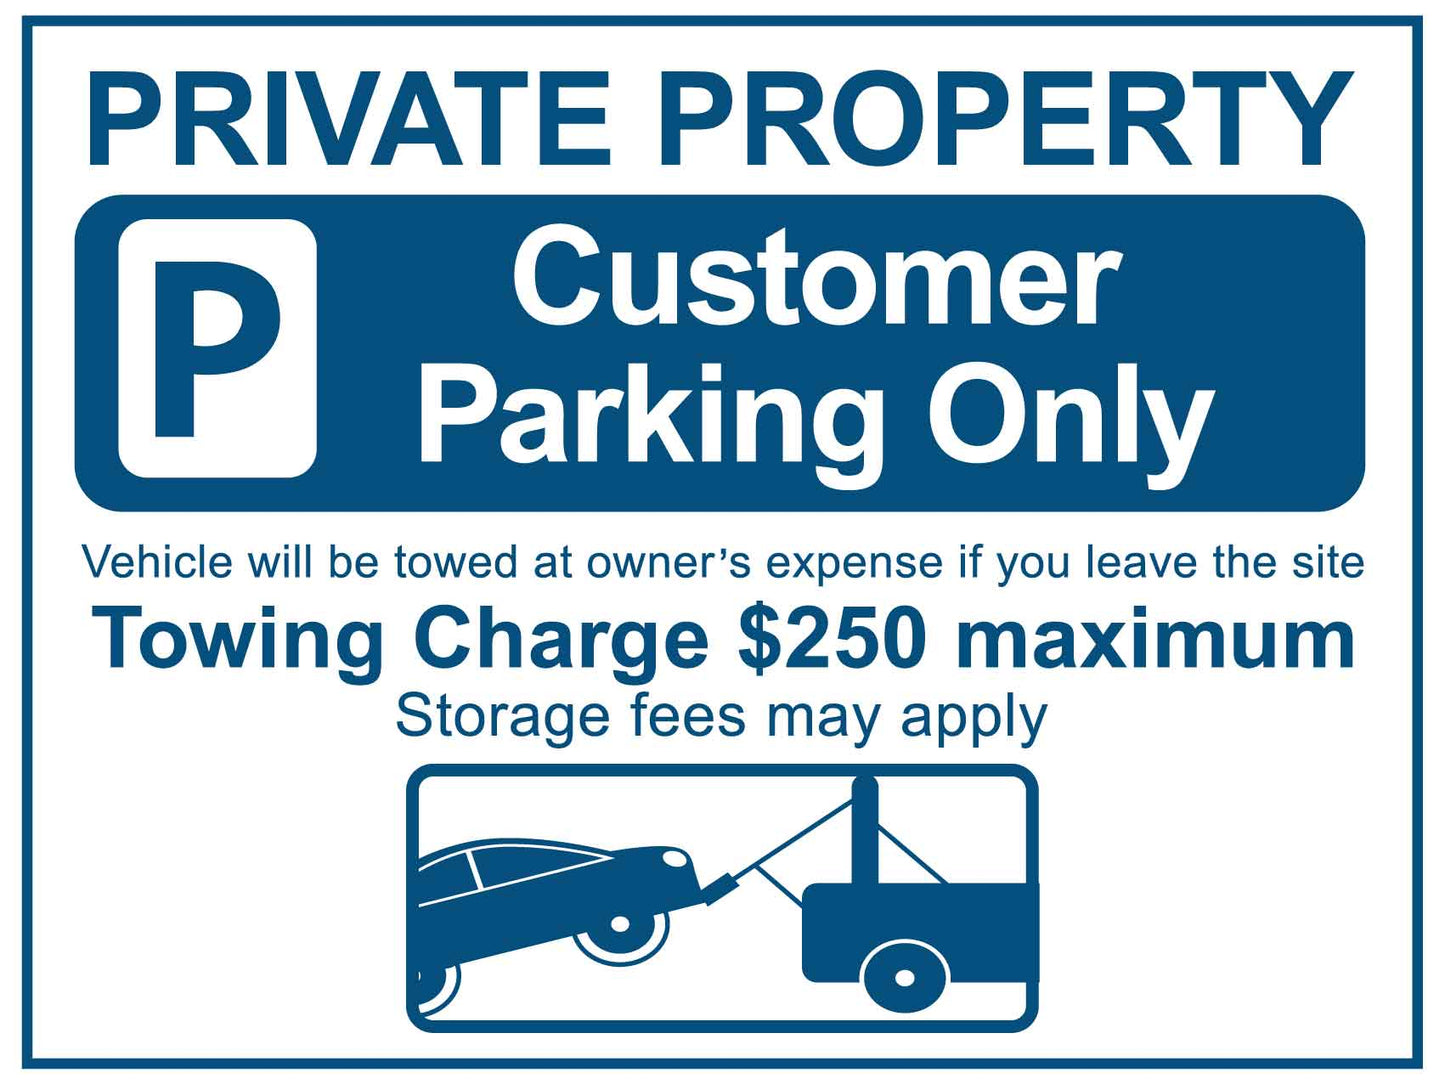 Private Property Customer Parking Only Towing Charge Sign